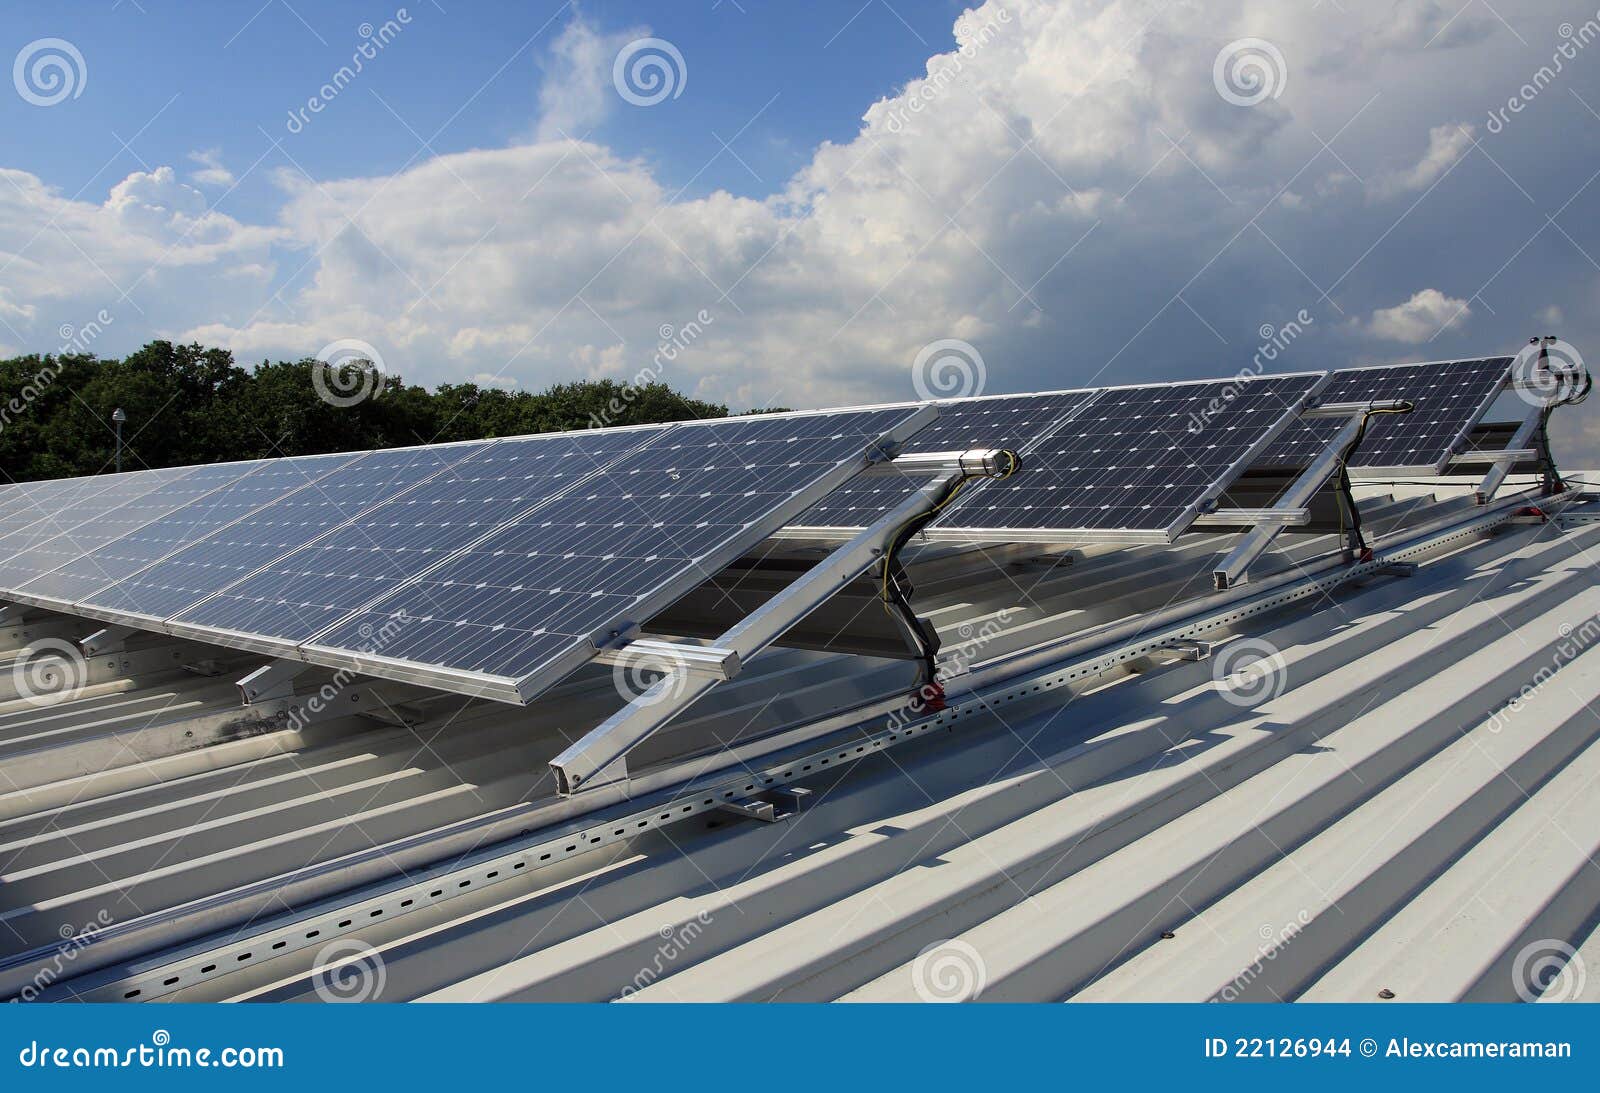 Roof With Solar Panels. Stock Images - Image: 22126944